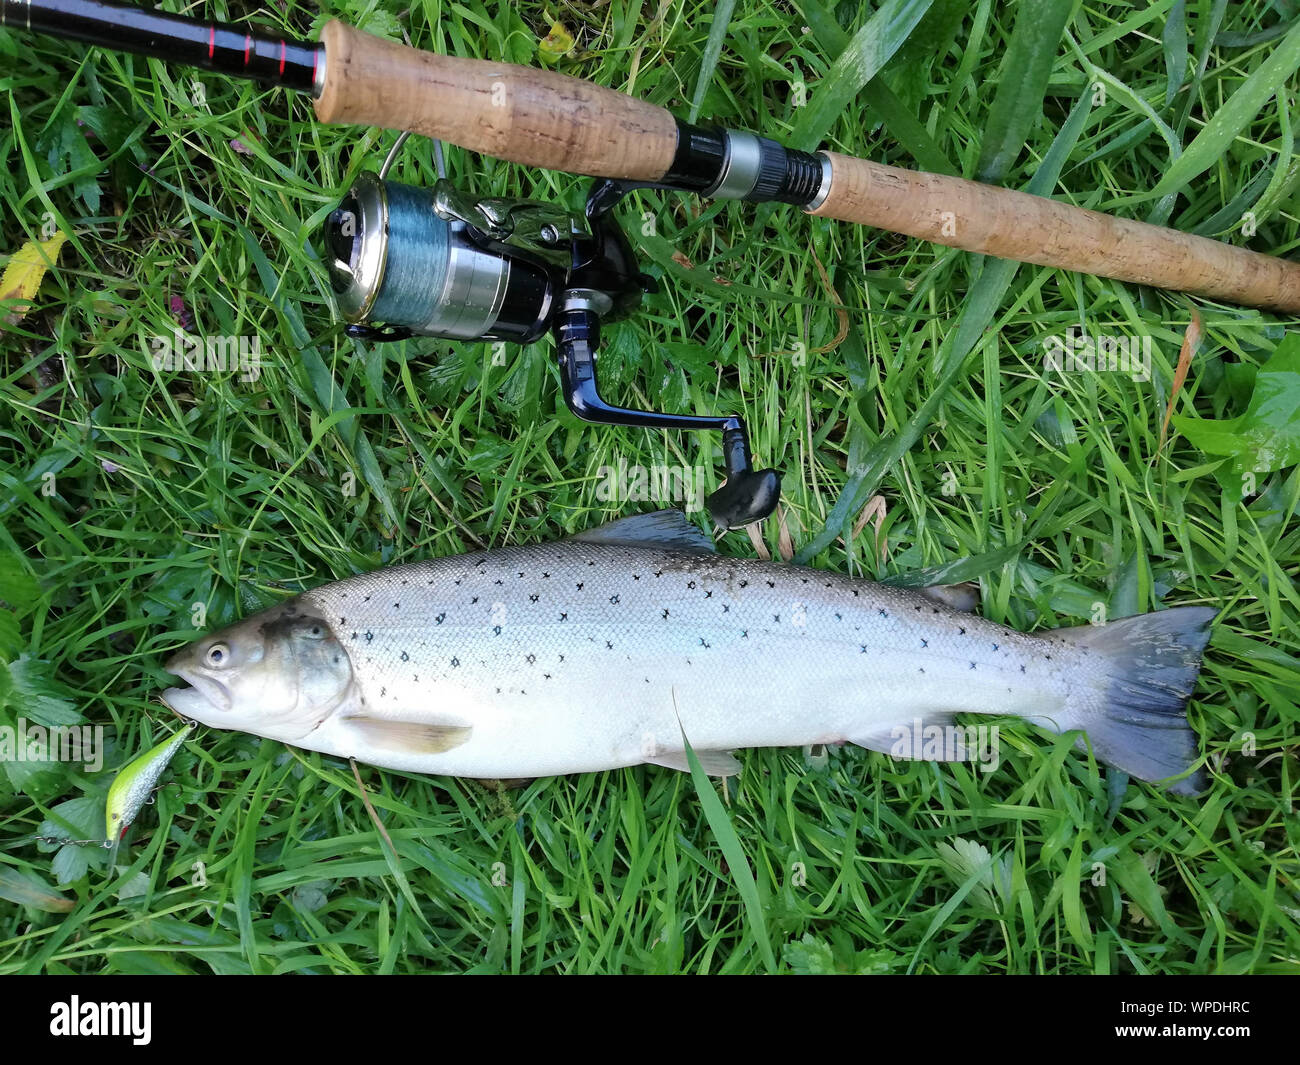 Angler's catch, Slupia river, Poland: steelhead trout and fishing rod and reel in grass high angle view Stock Photo